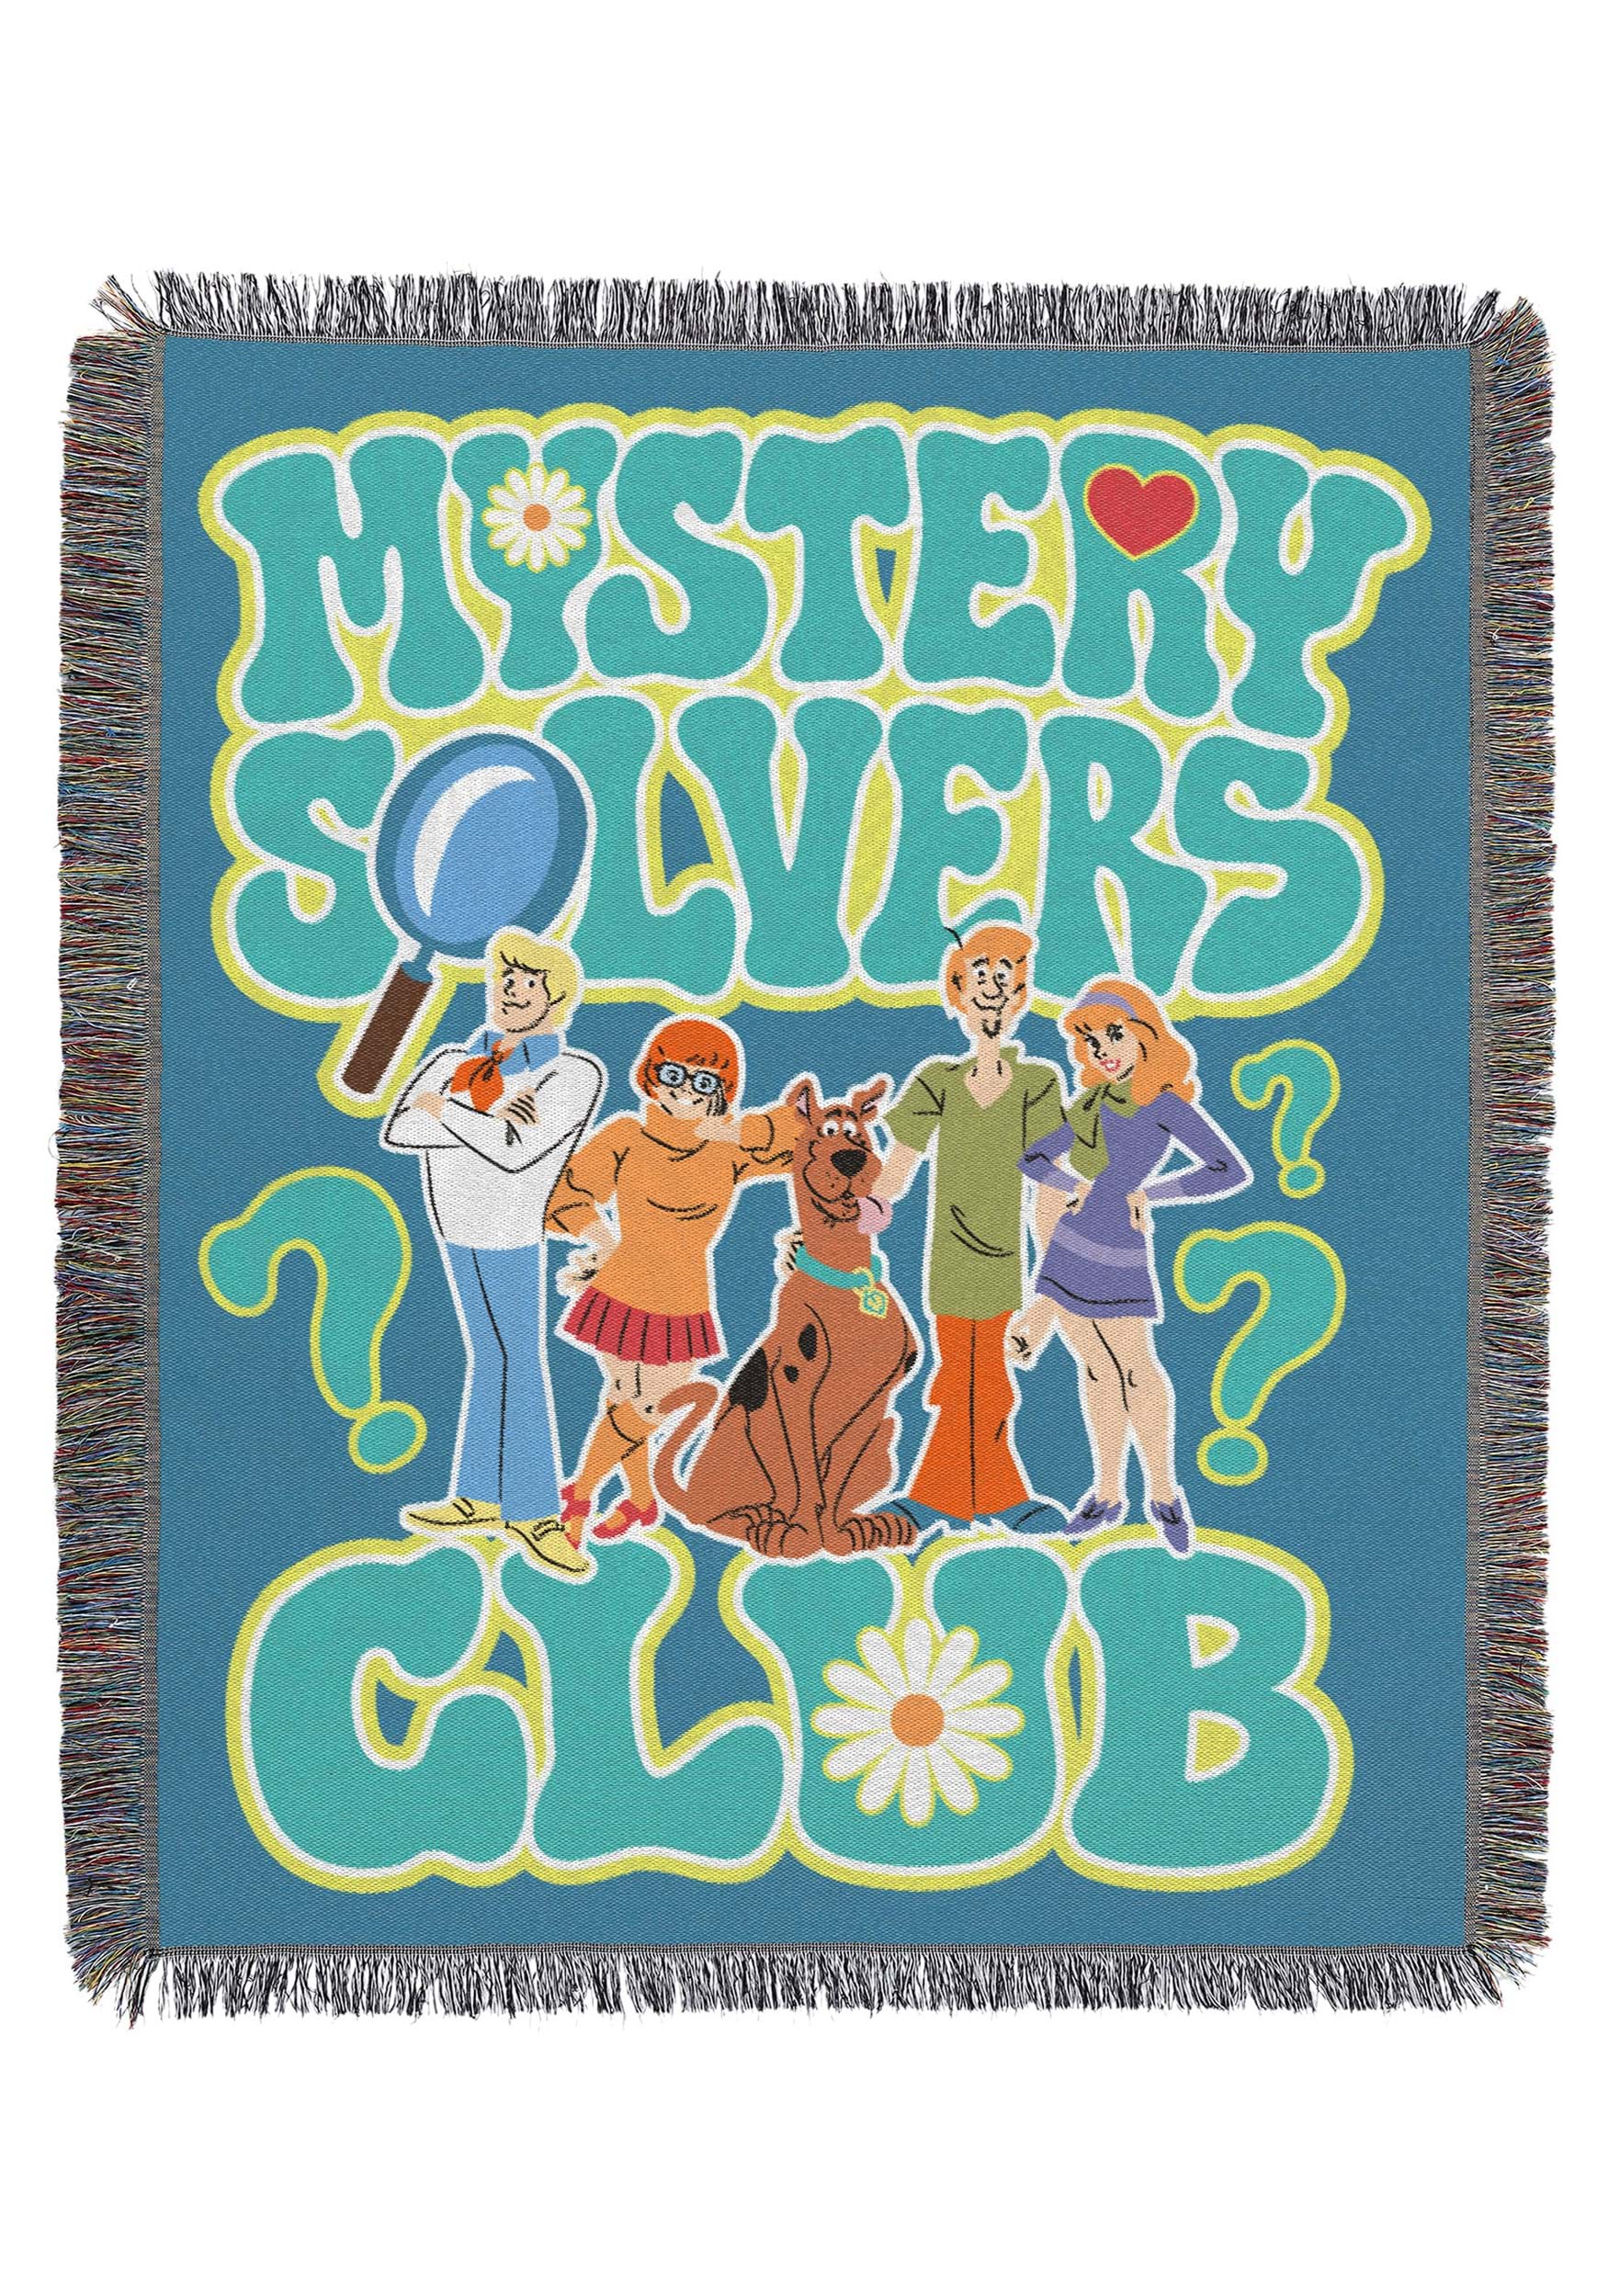 Scooby Doo Mystery Solvers Woven Tapestry Throw Blanket